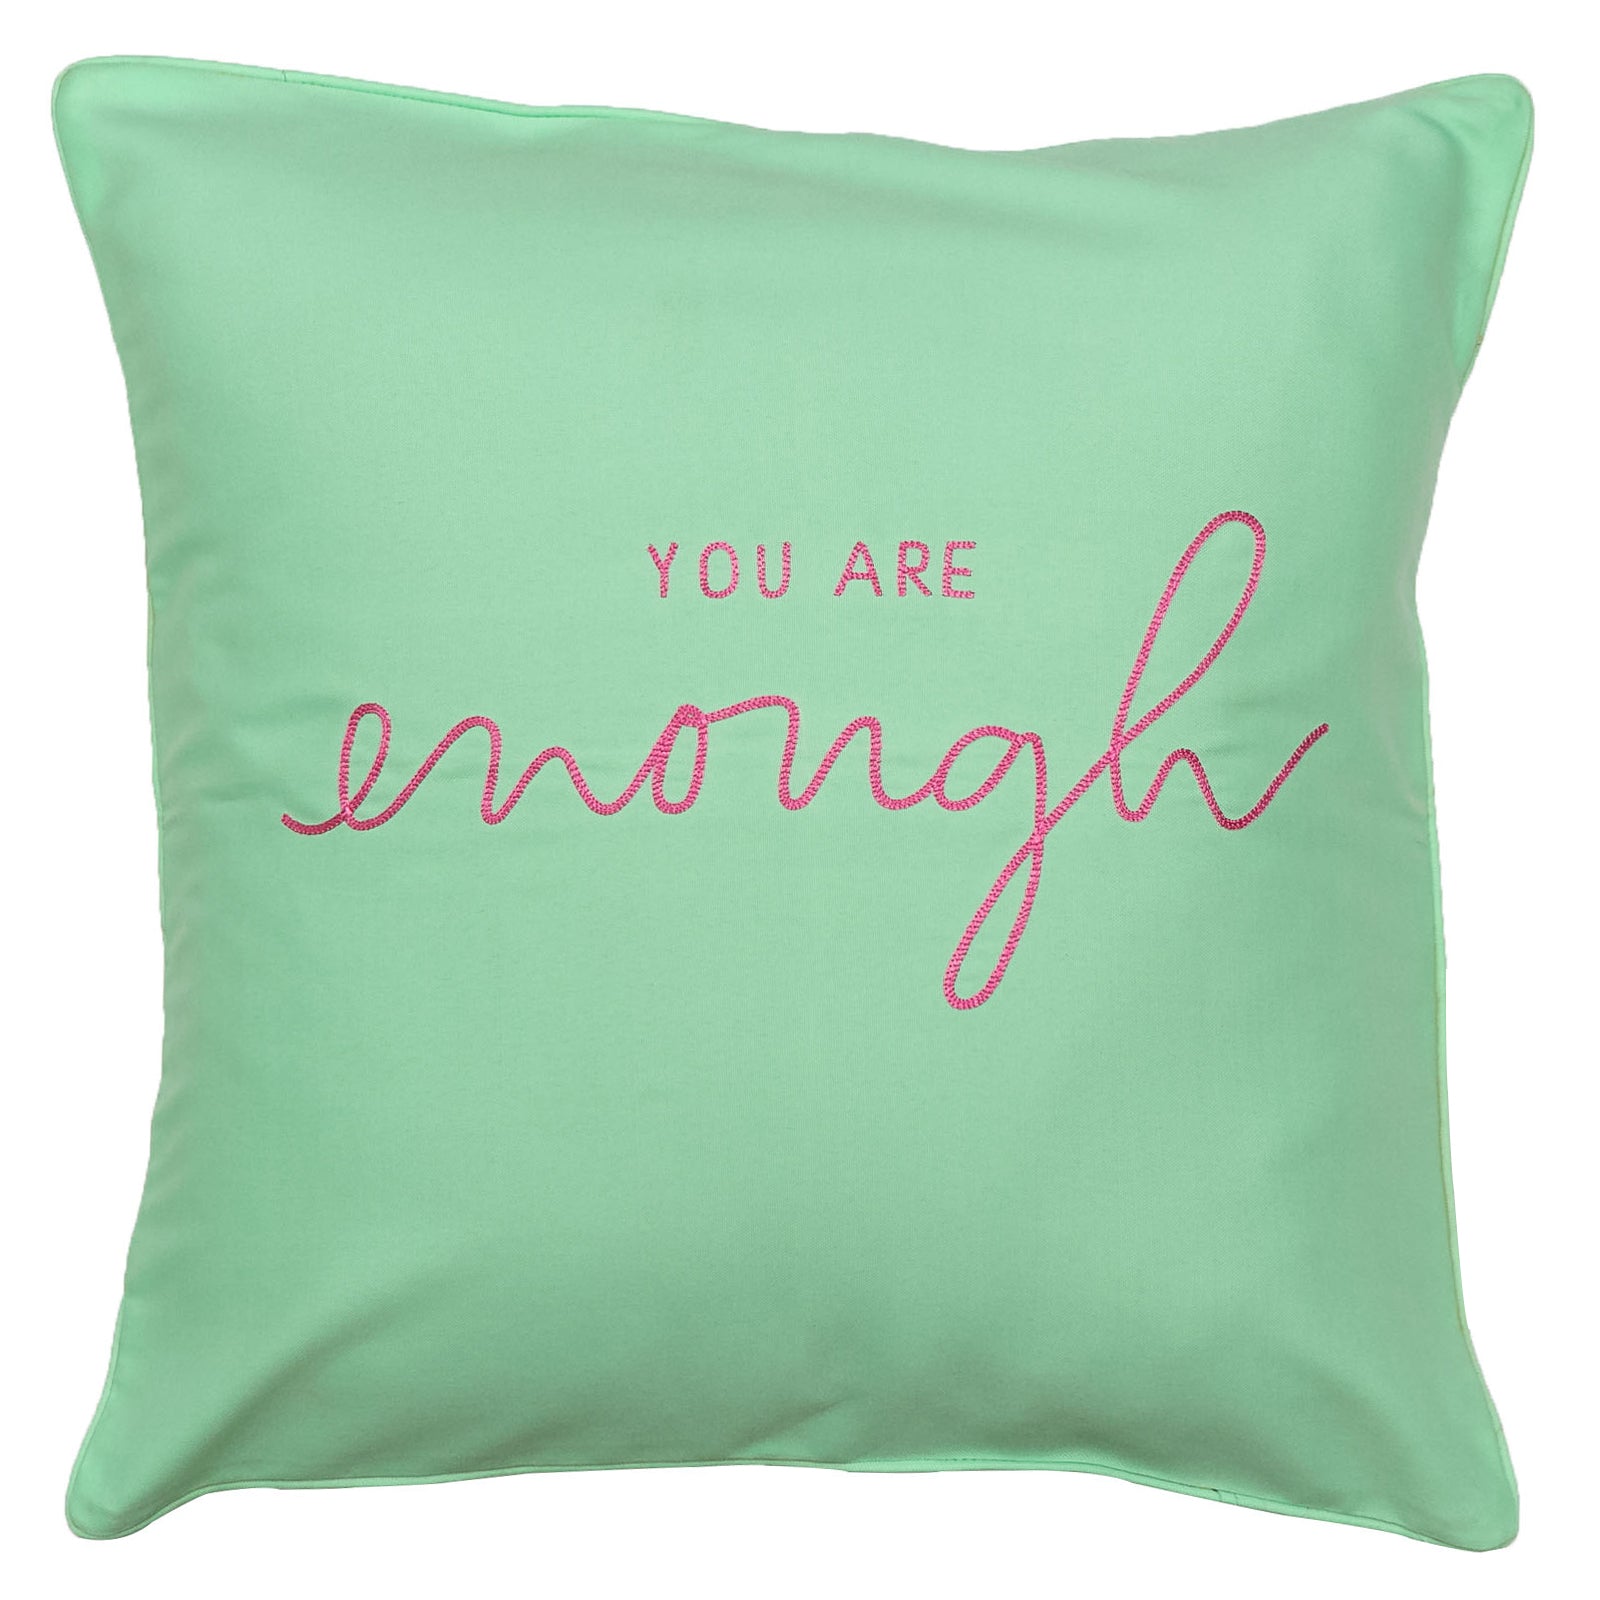 You Are Enough Cushion Cover